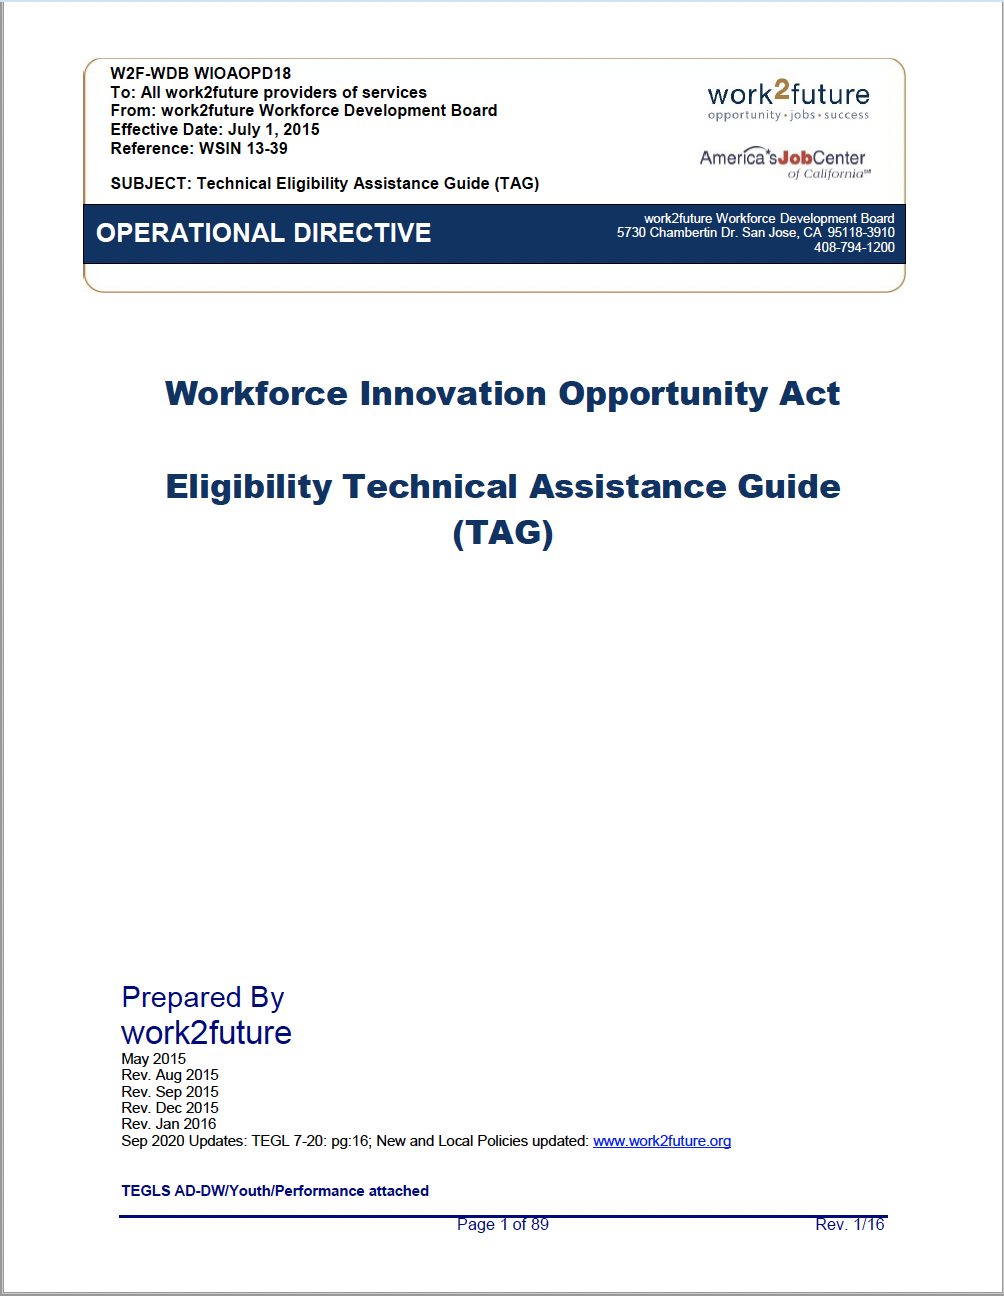 Eligibility Technical Assistance Guide [TAG] 2020